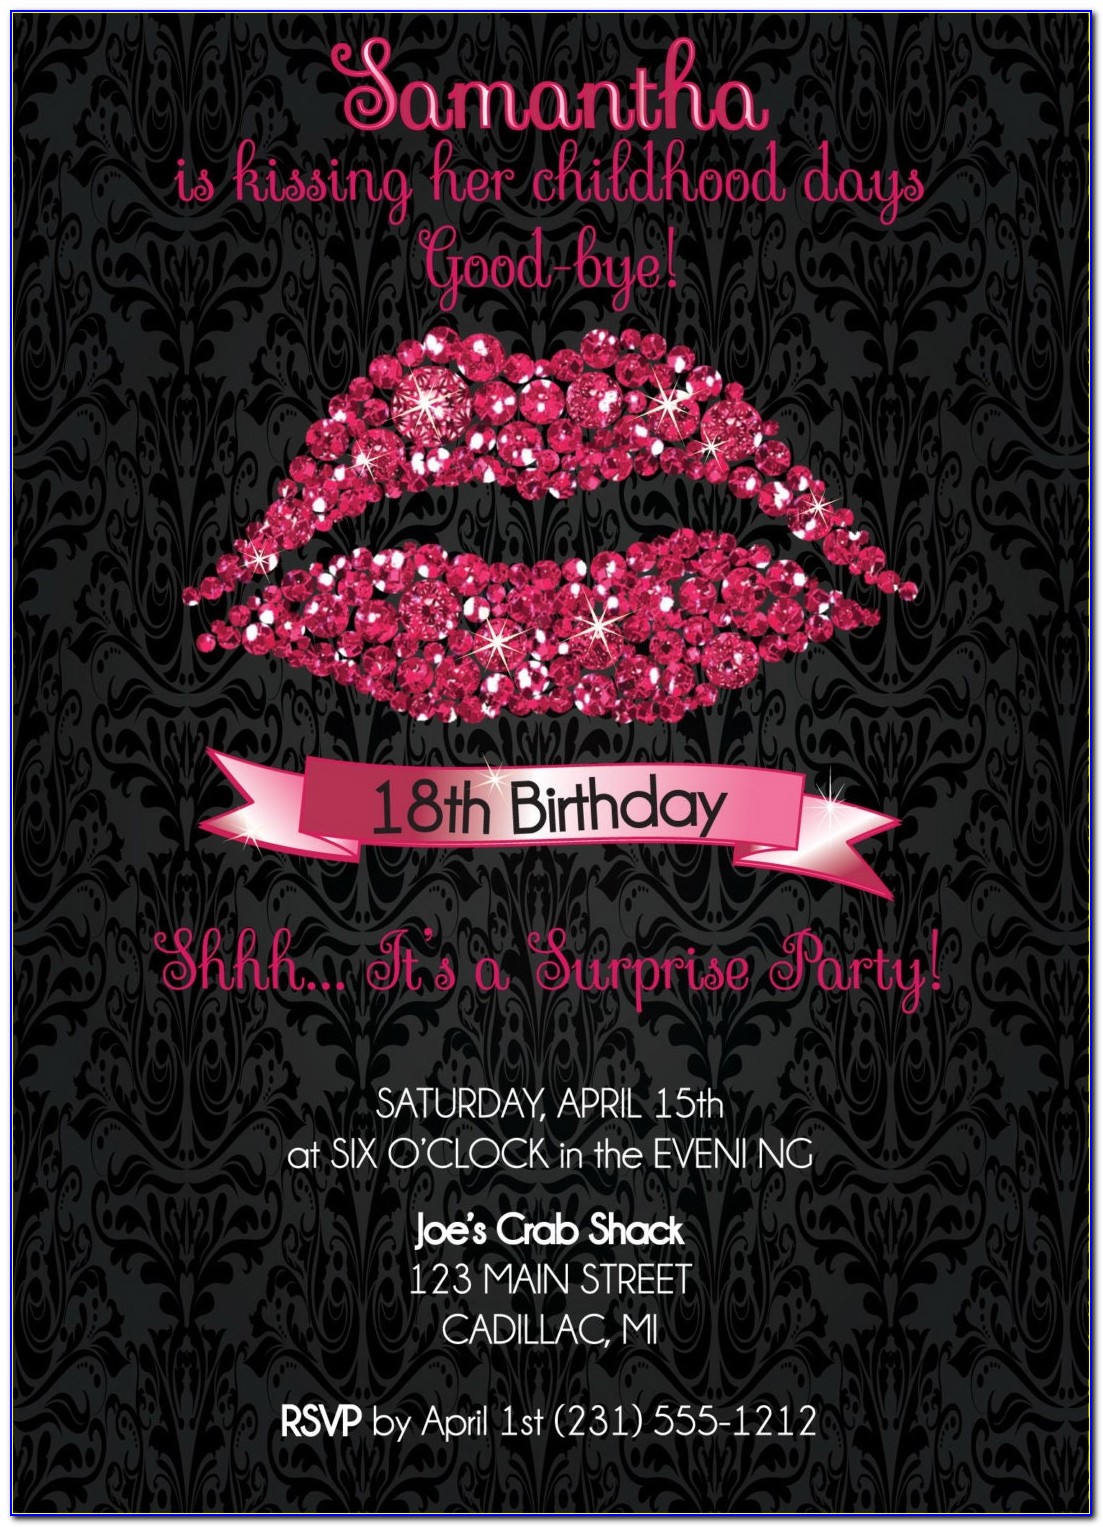 Invitation Card Template For 18th Birthday